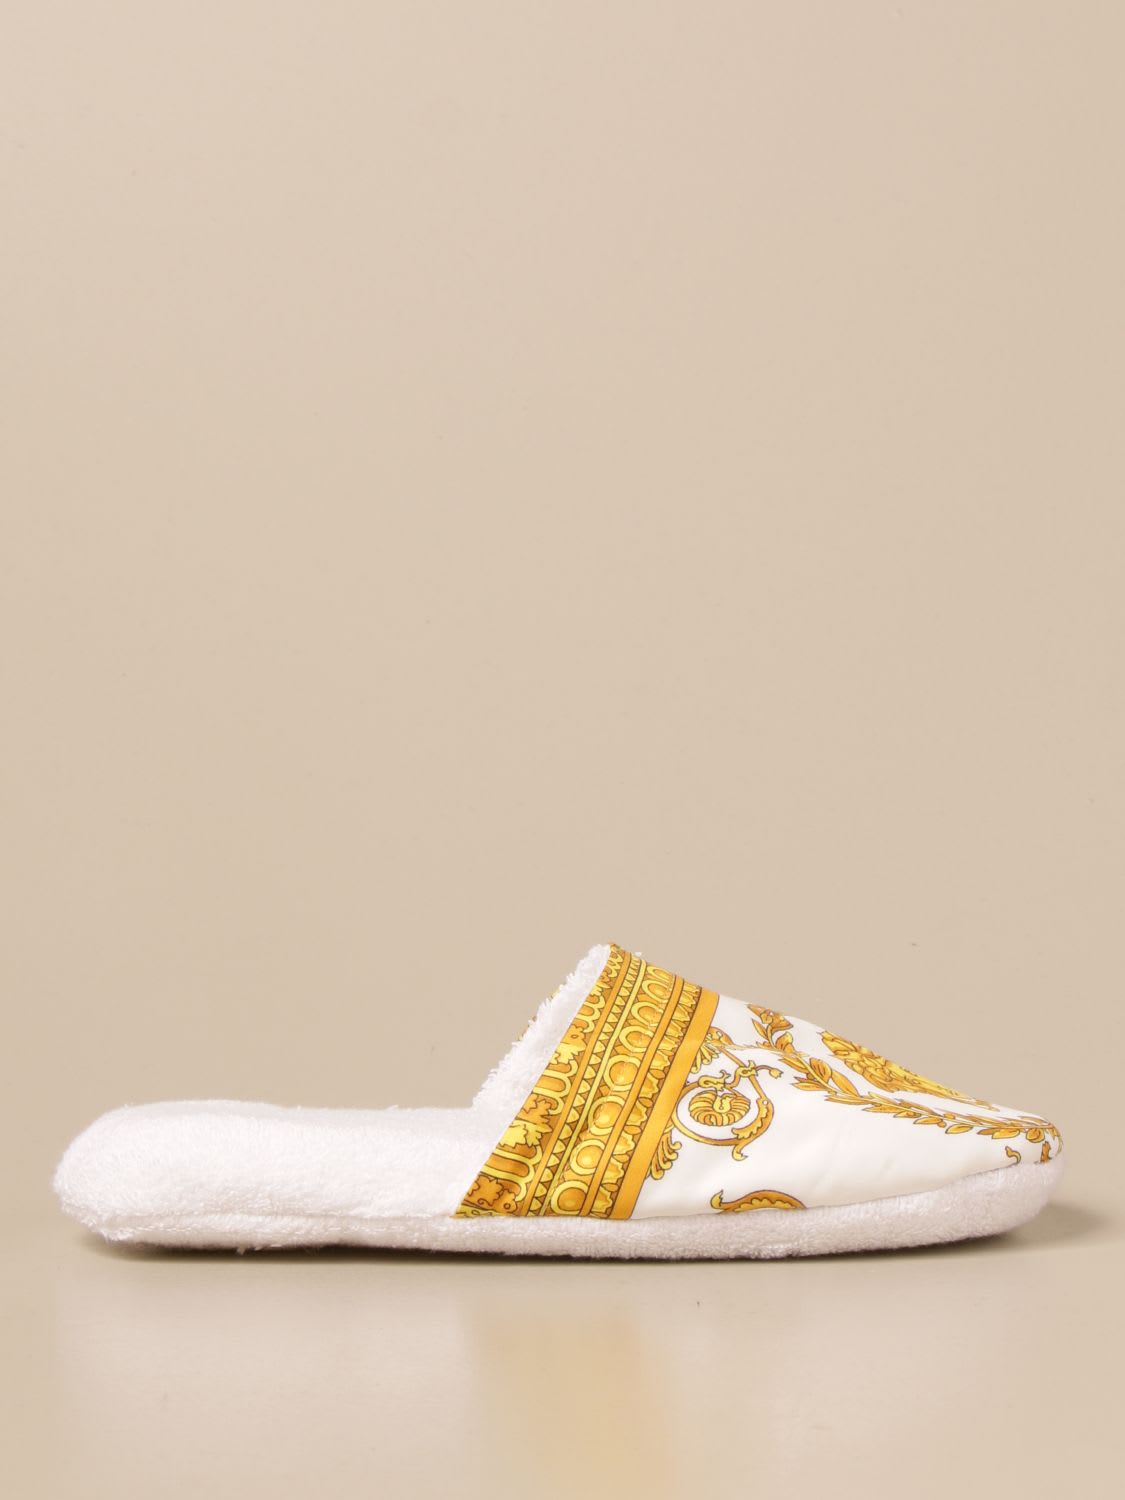 Buy Versace Home Flat Shoes Shoes Women Versace Home online, shop Versace shoes with free shipping